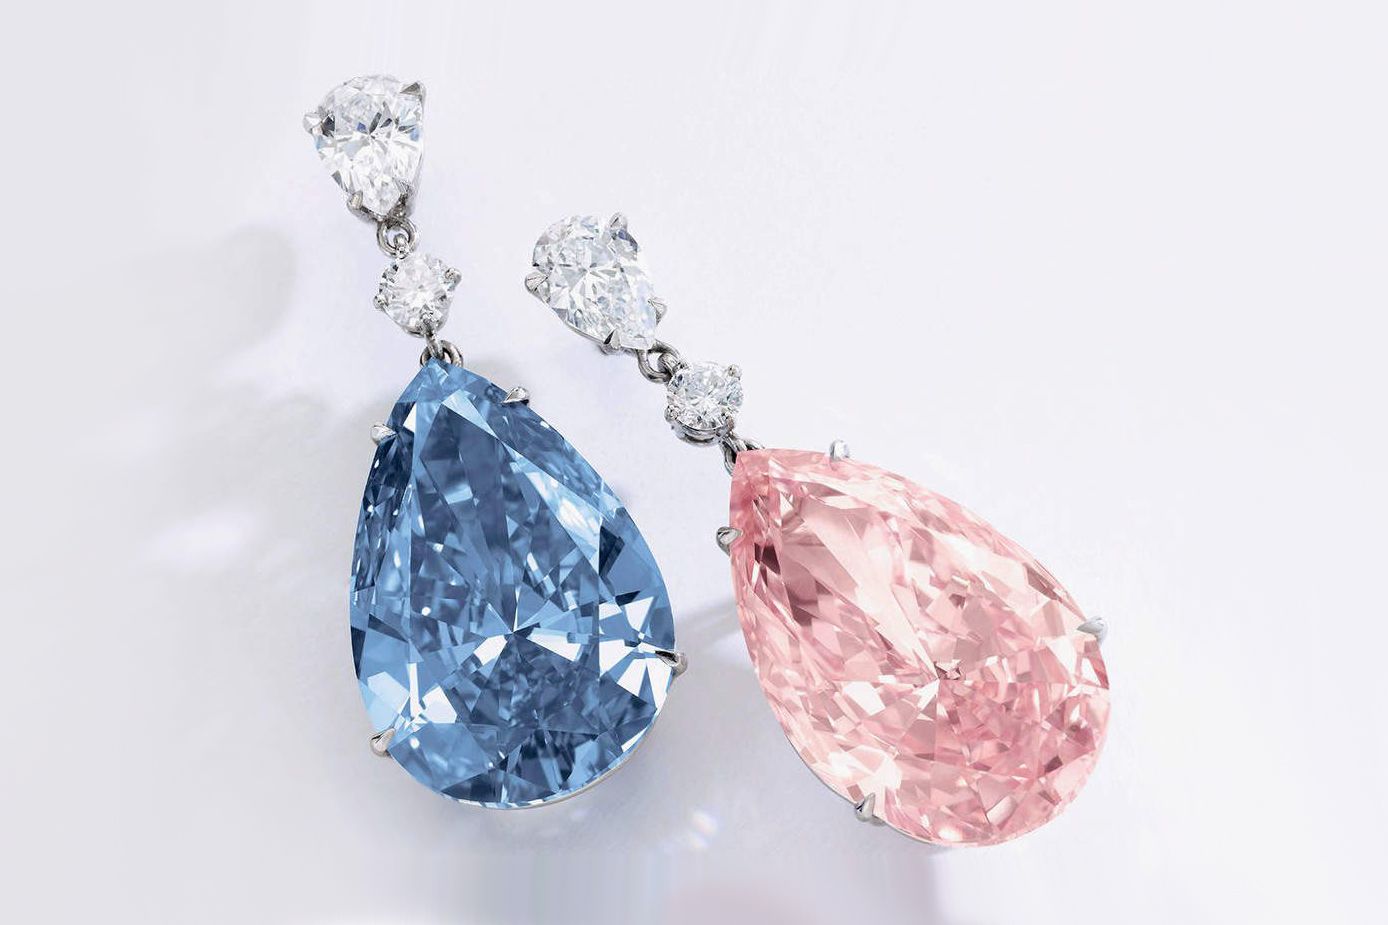 The Apollo and Artemis diamonds, sold in May 2017, including a 14.54 carat blue diamond that is now called ‘The Memory of Autumn Leaves’ 